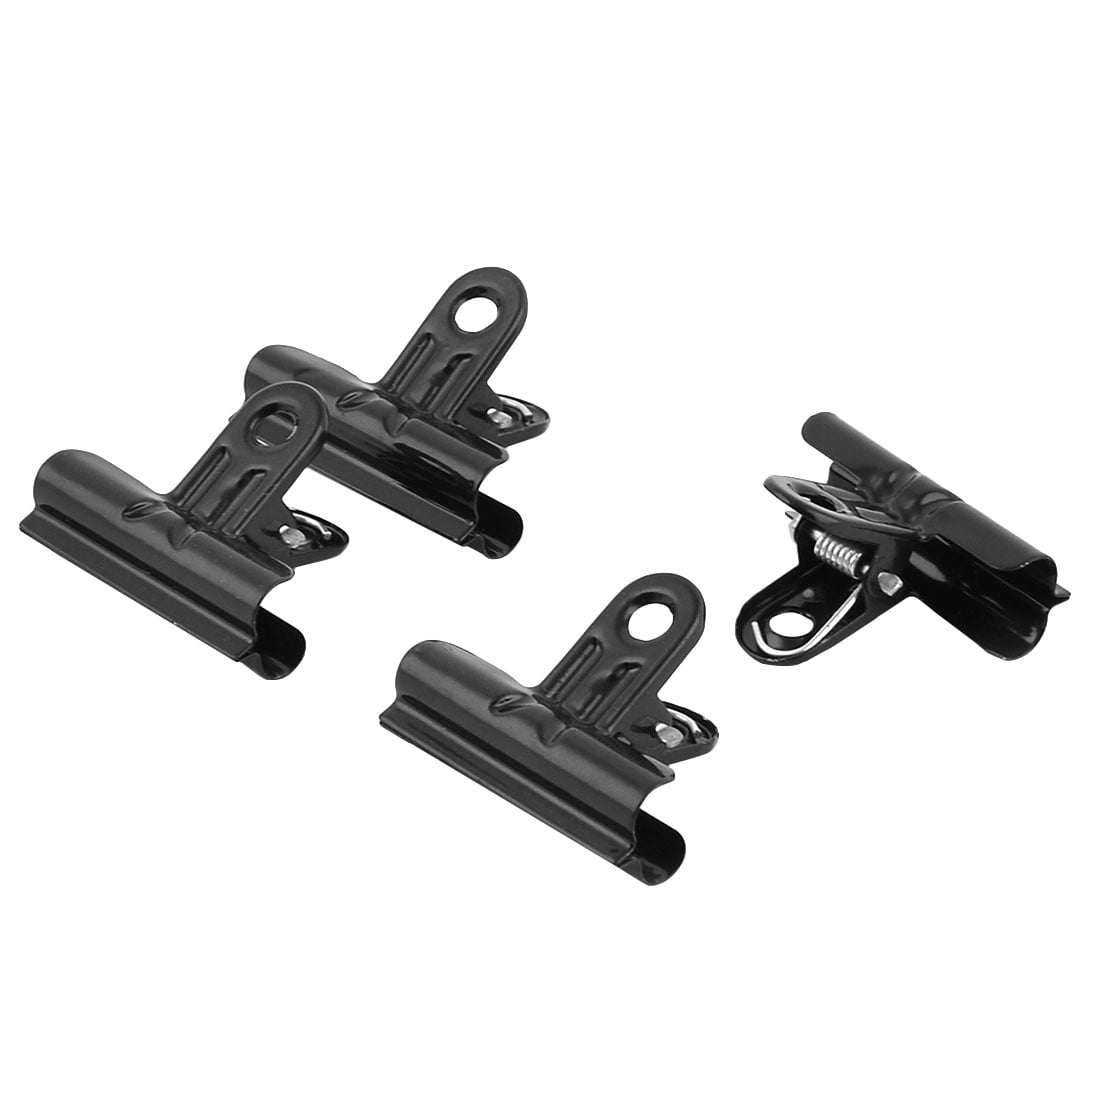 25 Pack Bulldog Clips Black, 50mm 2 inch Black Paper Clips Metal Hinge Chip Clip File Clamps with Cubicle Hooks for Photos,Crafts,Food Bags,Drawings at School,Home Kitchen & Office Supplies